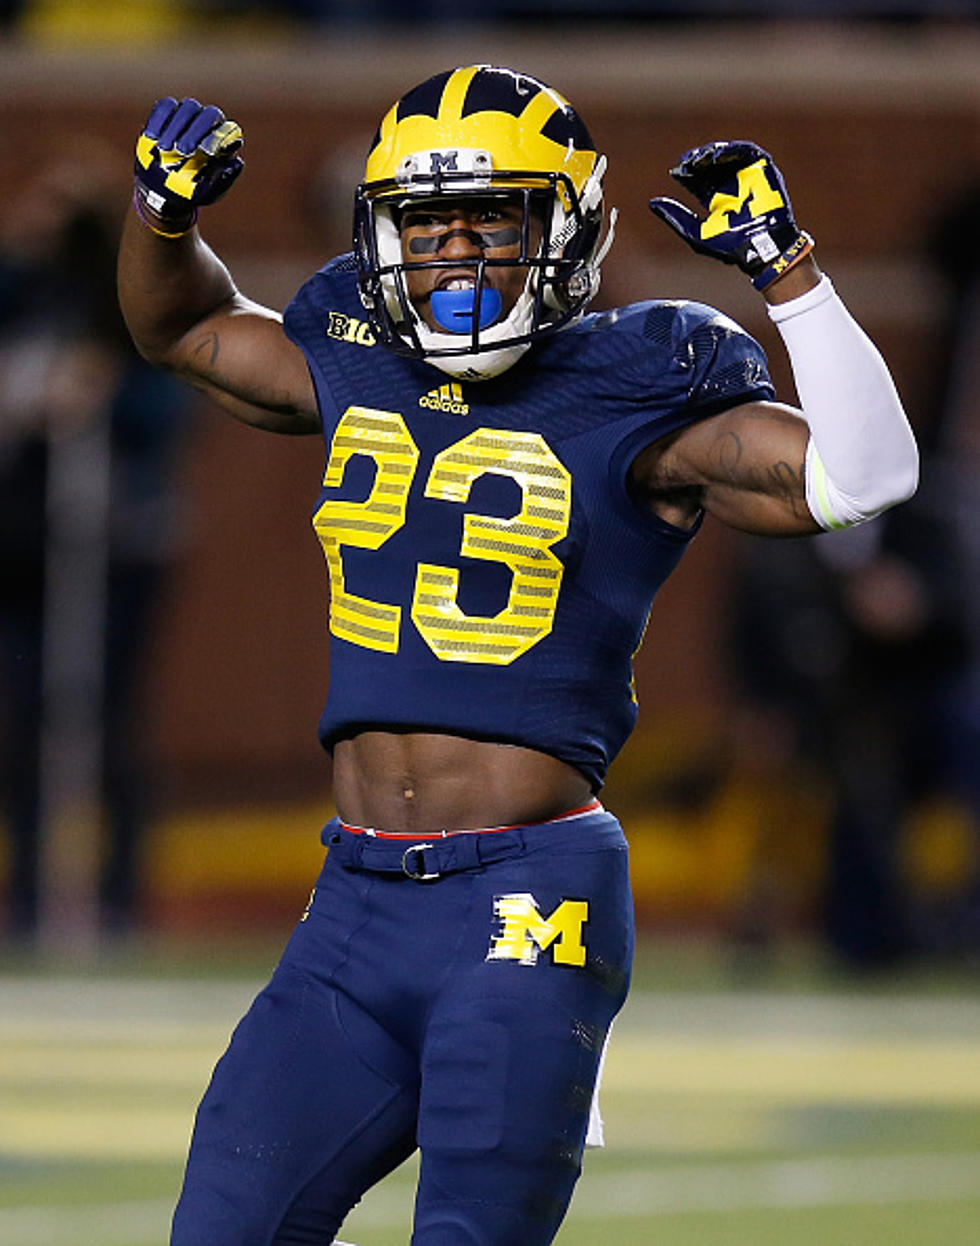 Michigan’s Dennis Norfleet Dances to ‘Atomic Dog,’ Gets Mad Respect From George Clinton [Video]